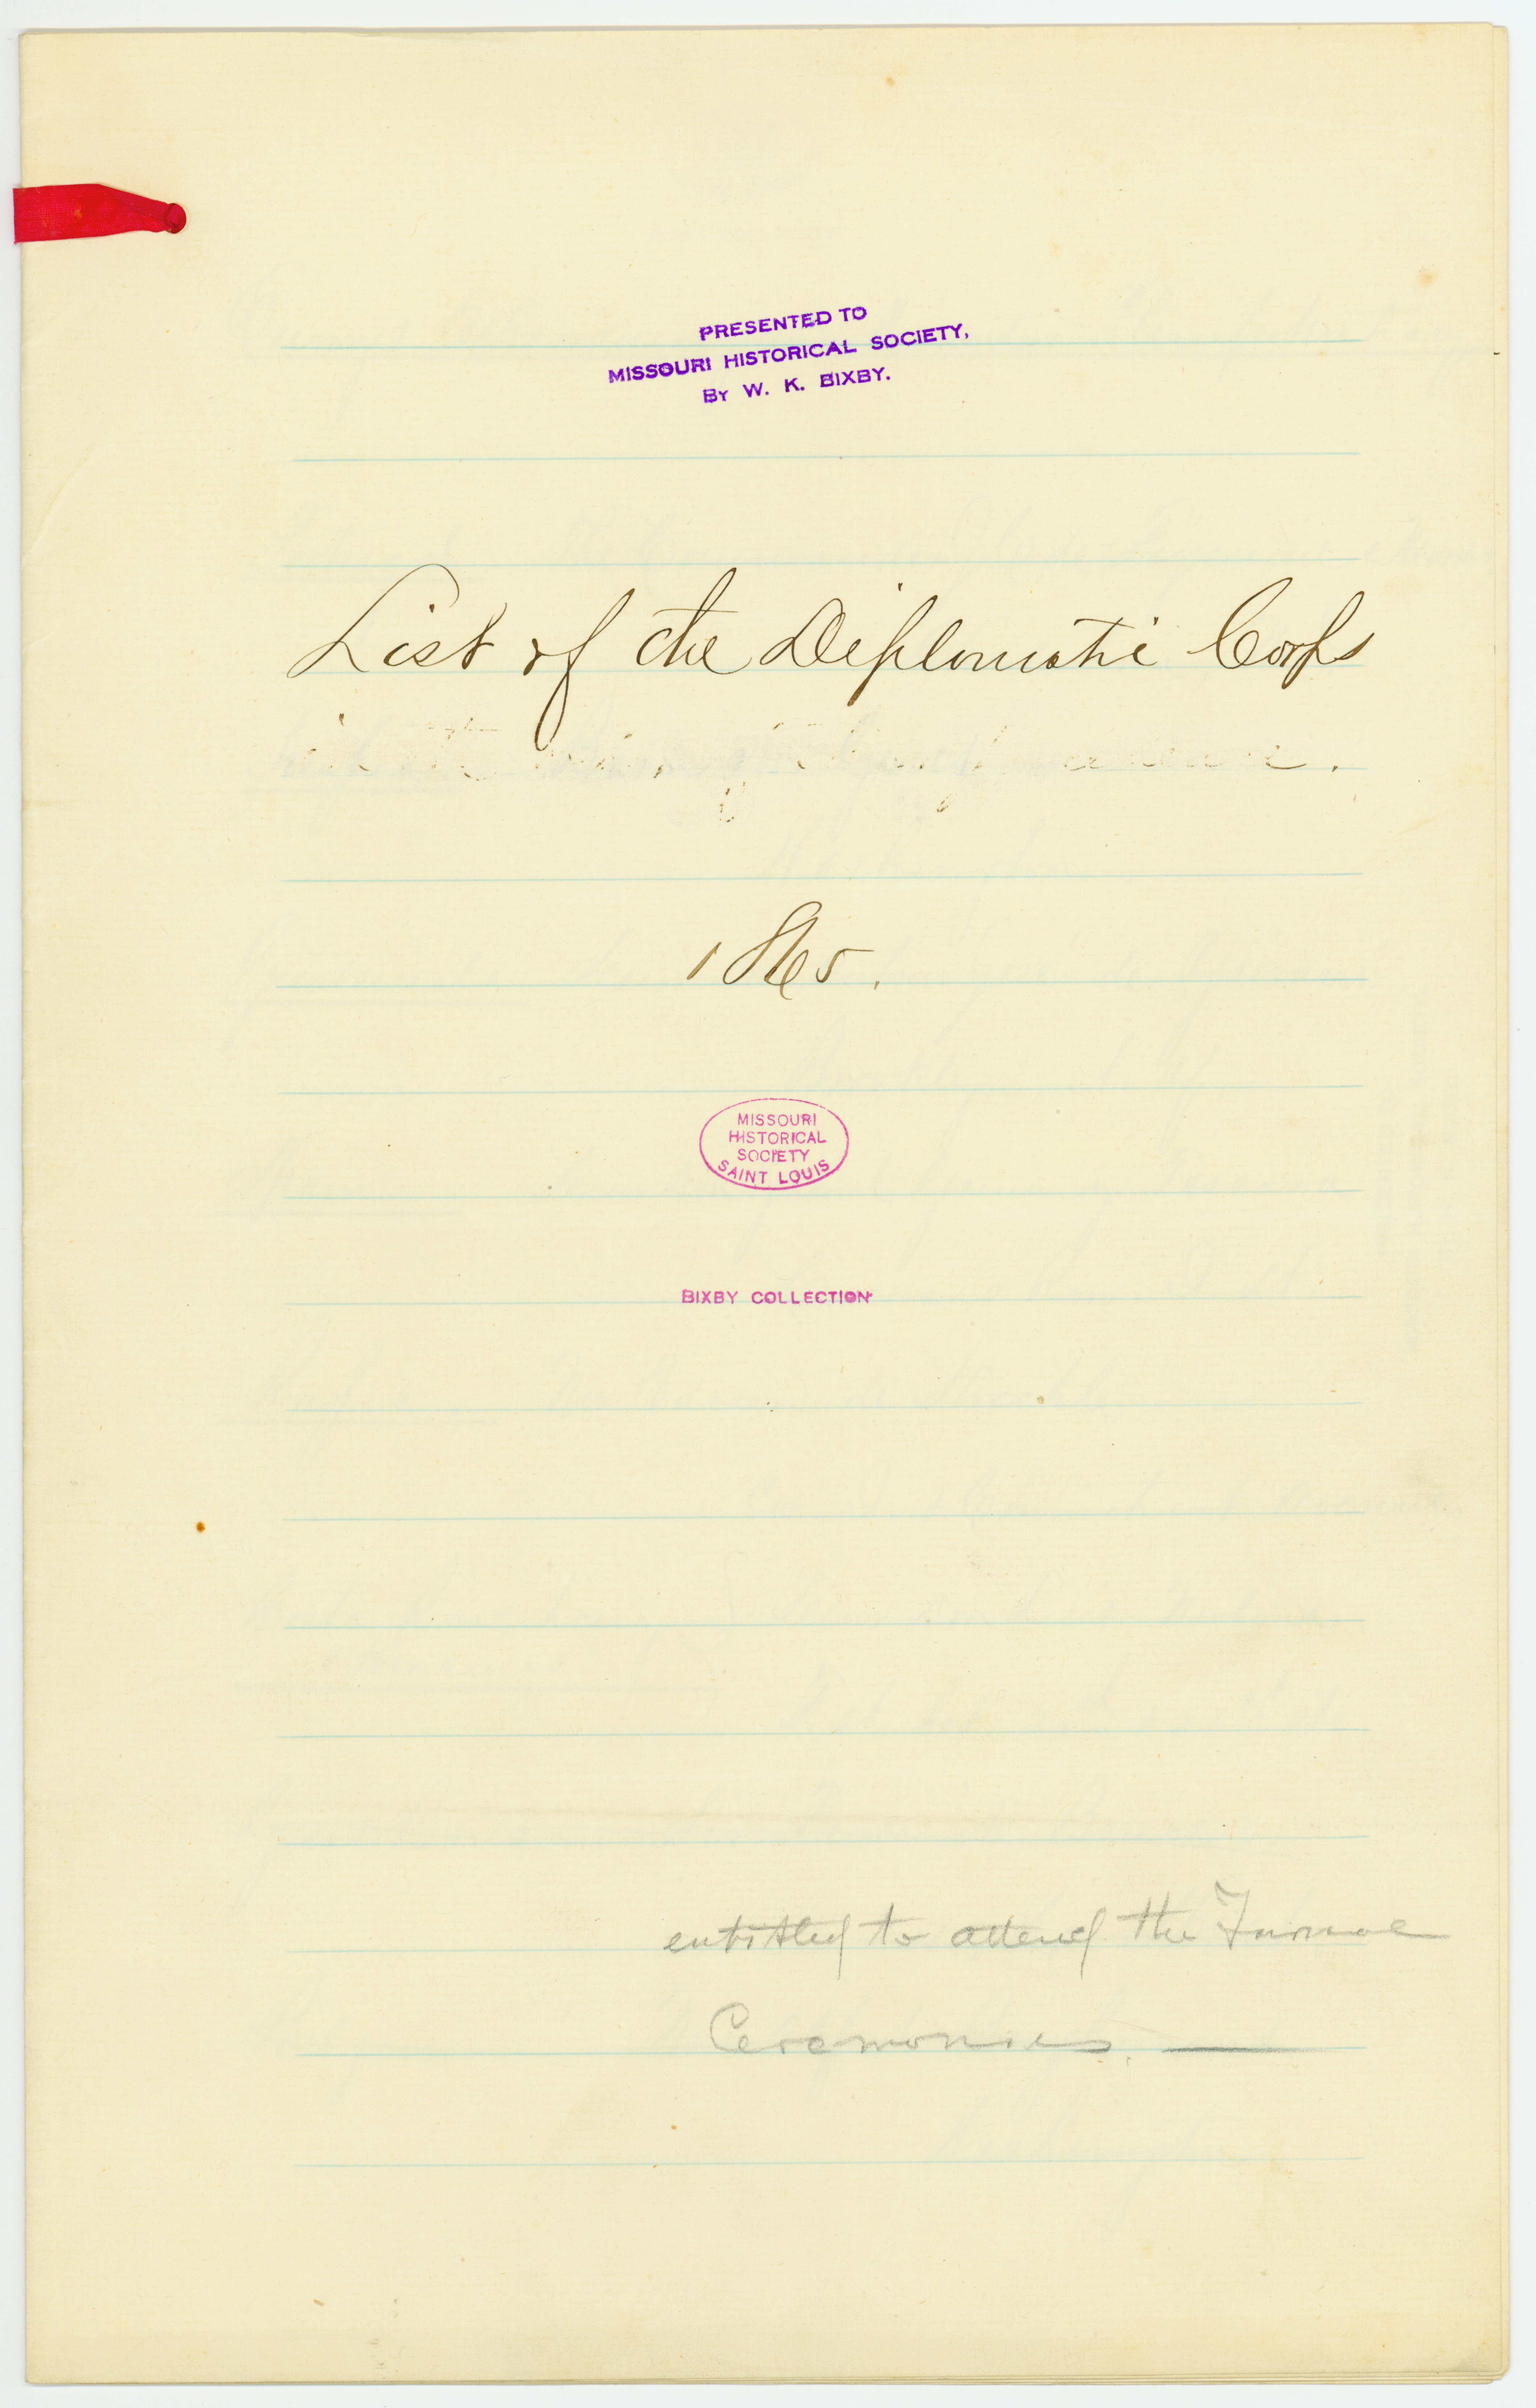 List of the Diplomatic Corps entitled to attend the funeral ceremonies of Abraham Lincoln, [April] 1865